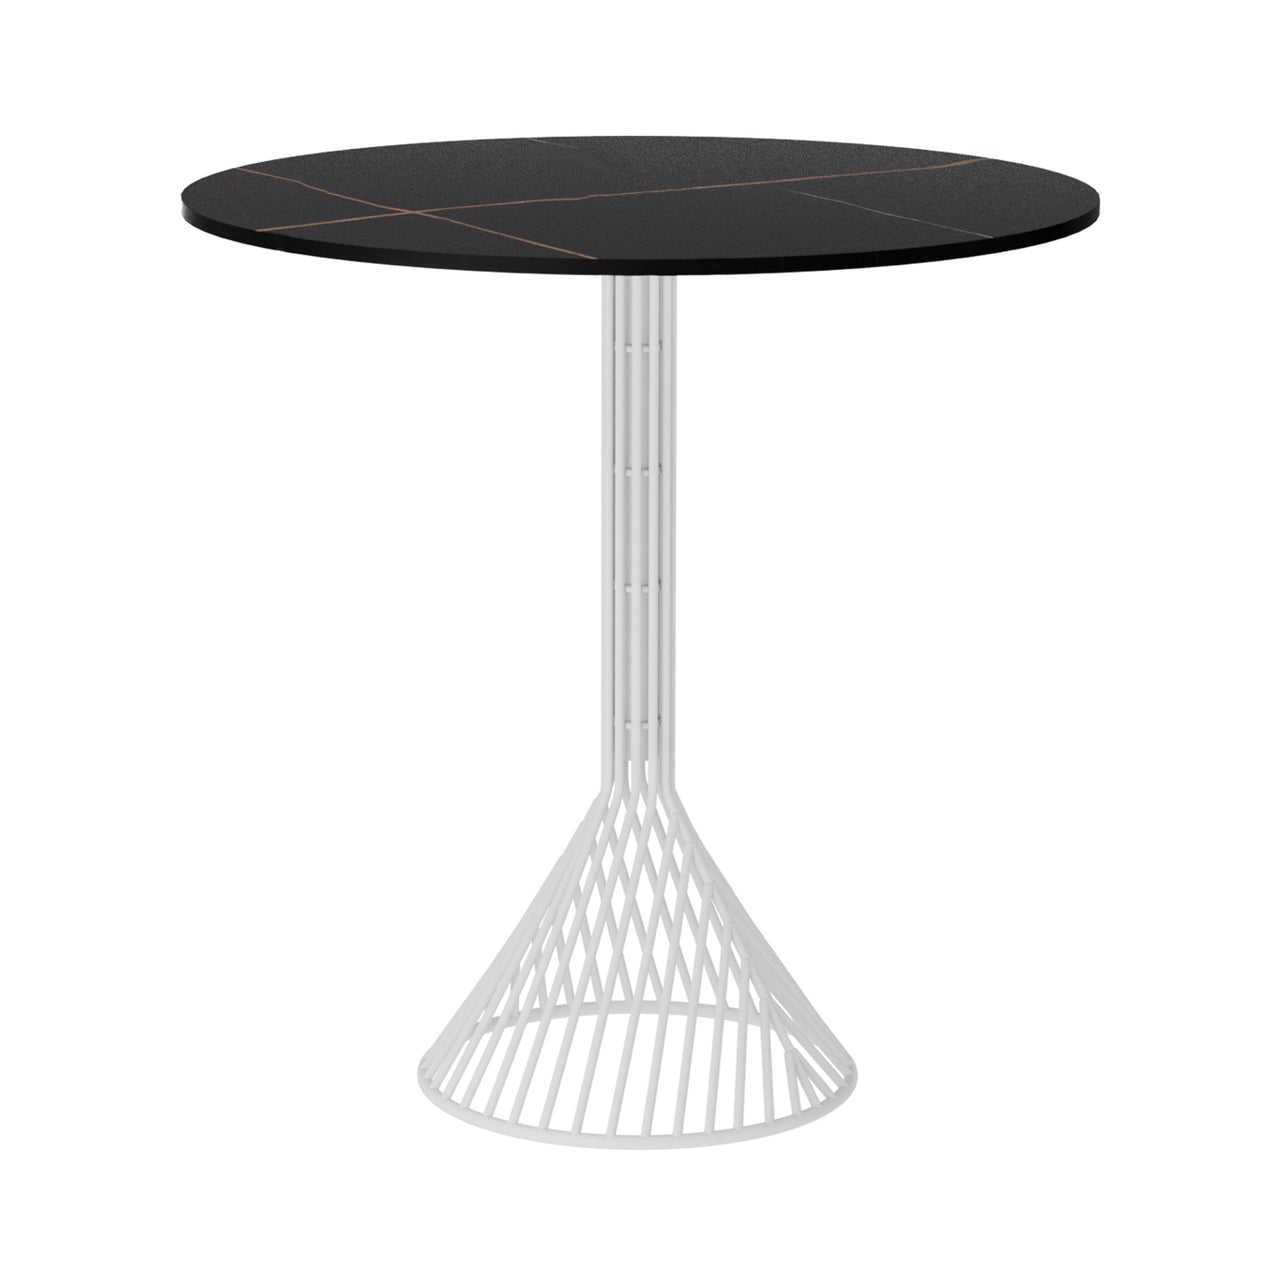 Bistro Cafe Table with Stone Top: Black + White